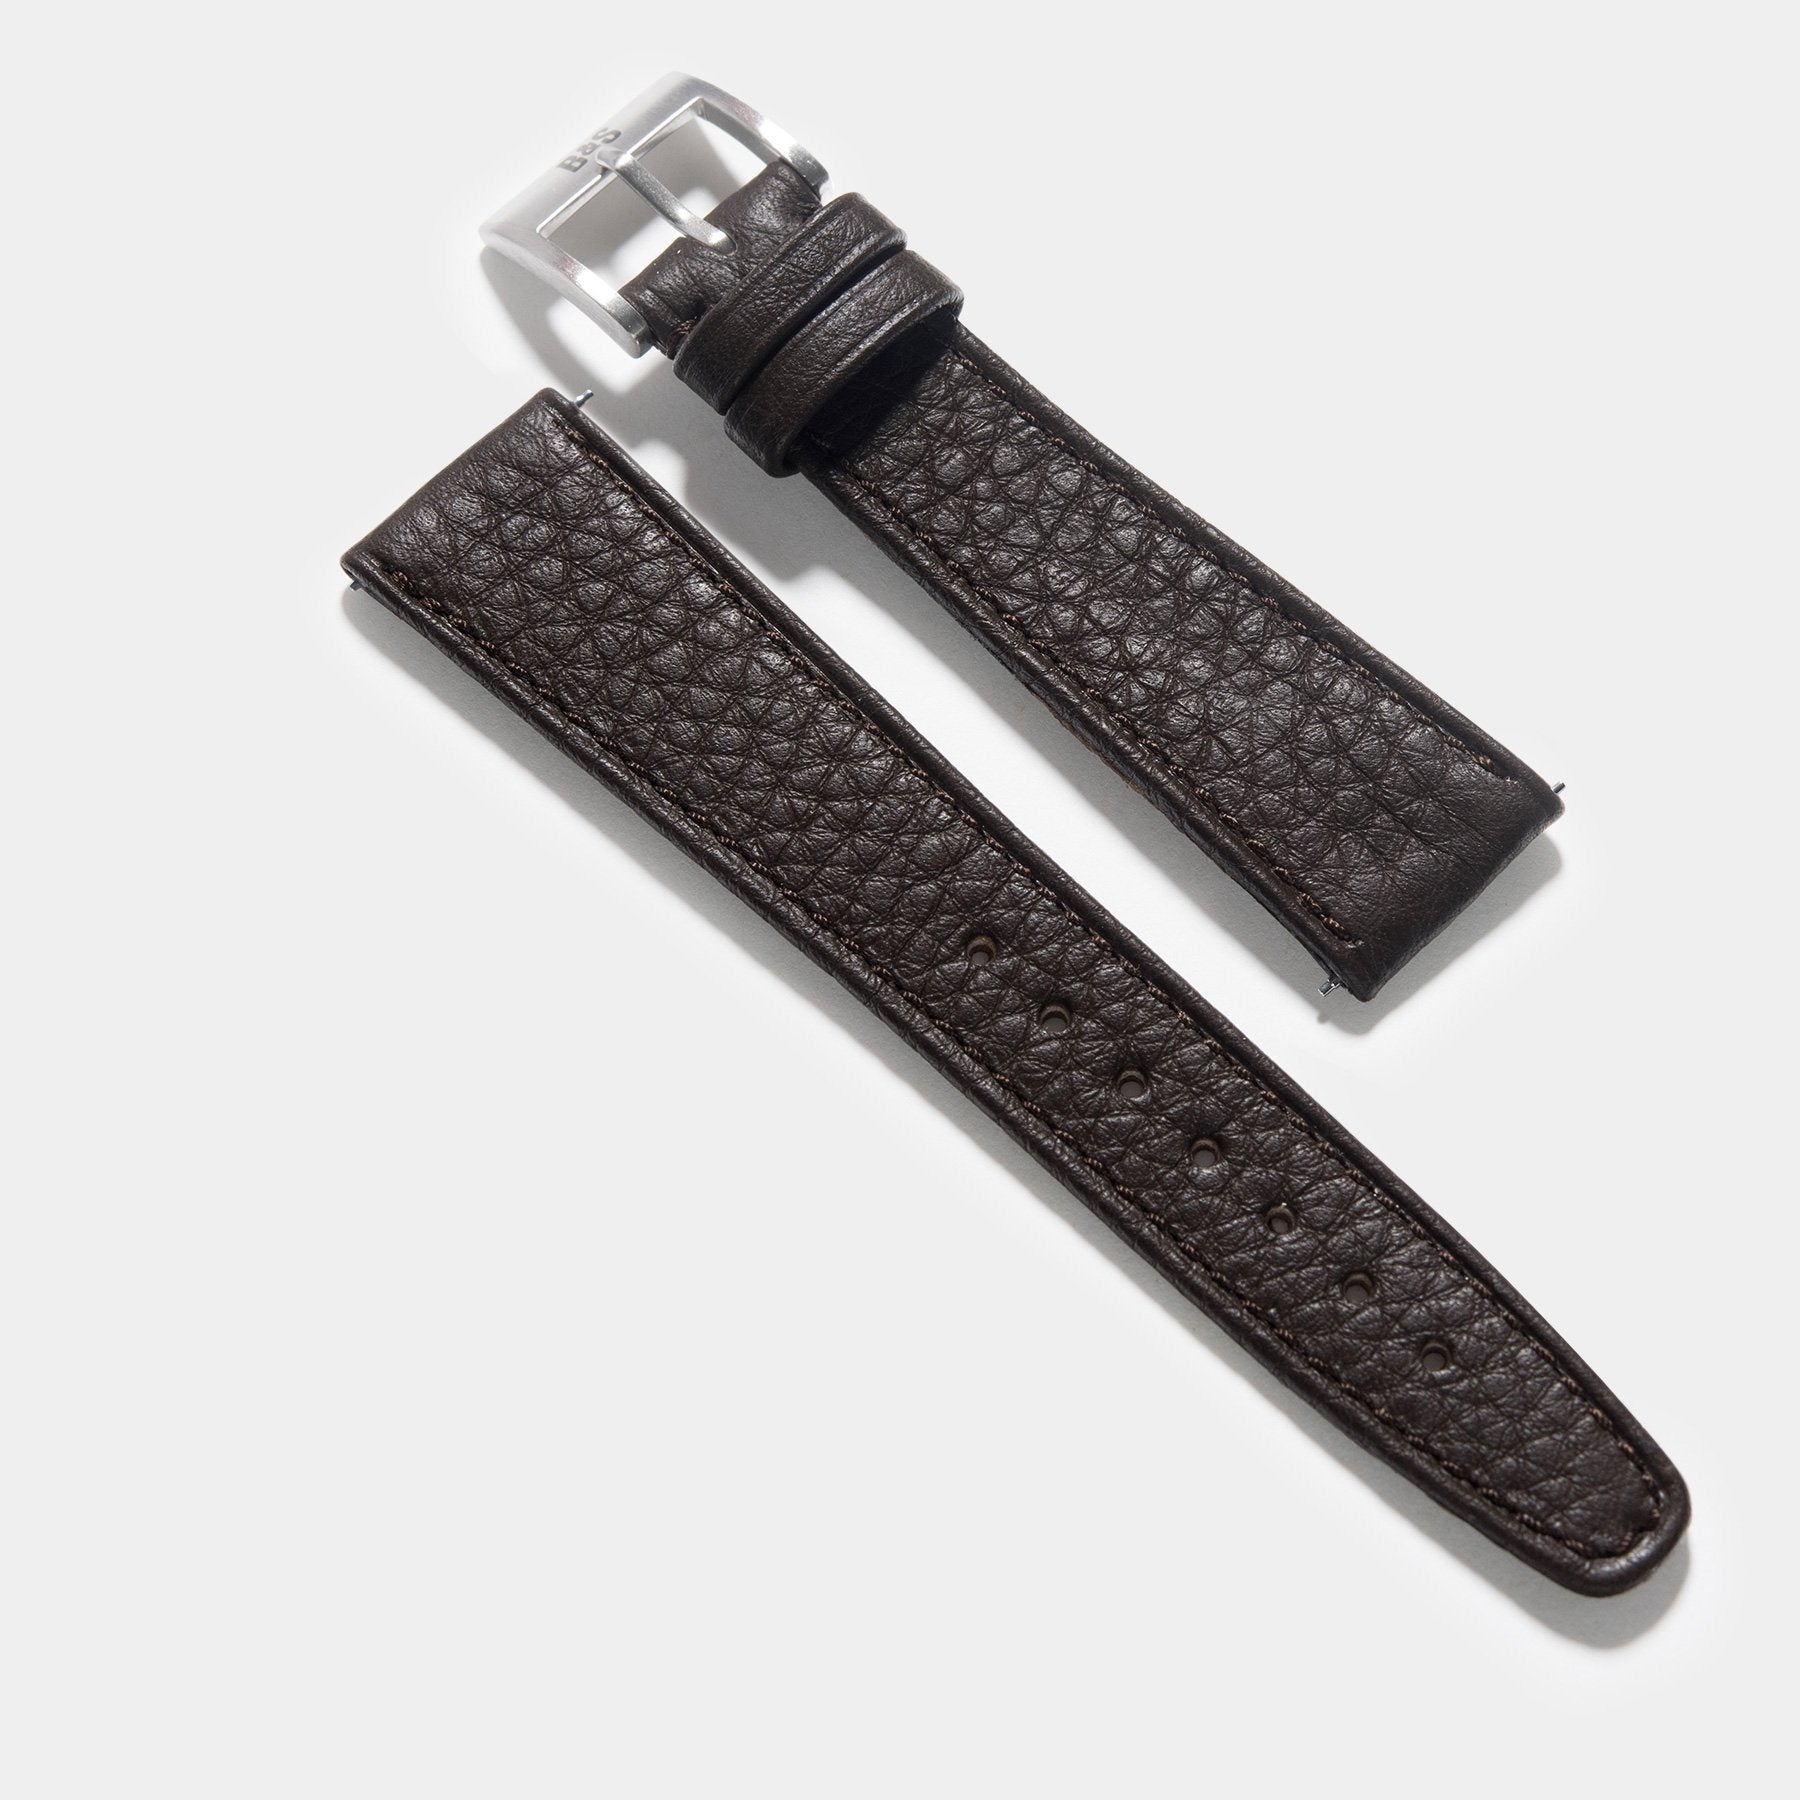 FIND OUT THE NEW STRAP COLOR OF SPEEDY 20